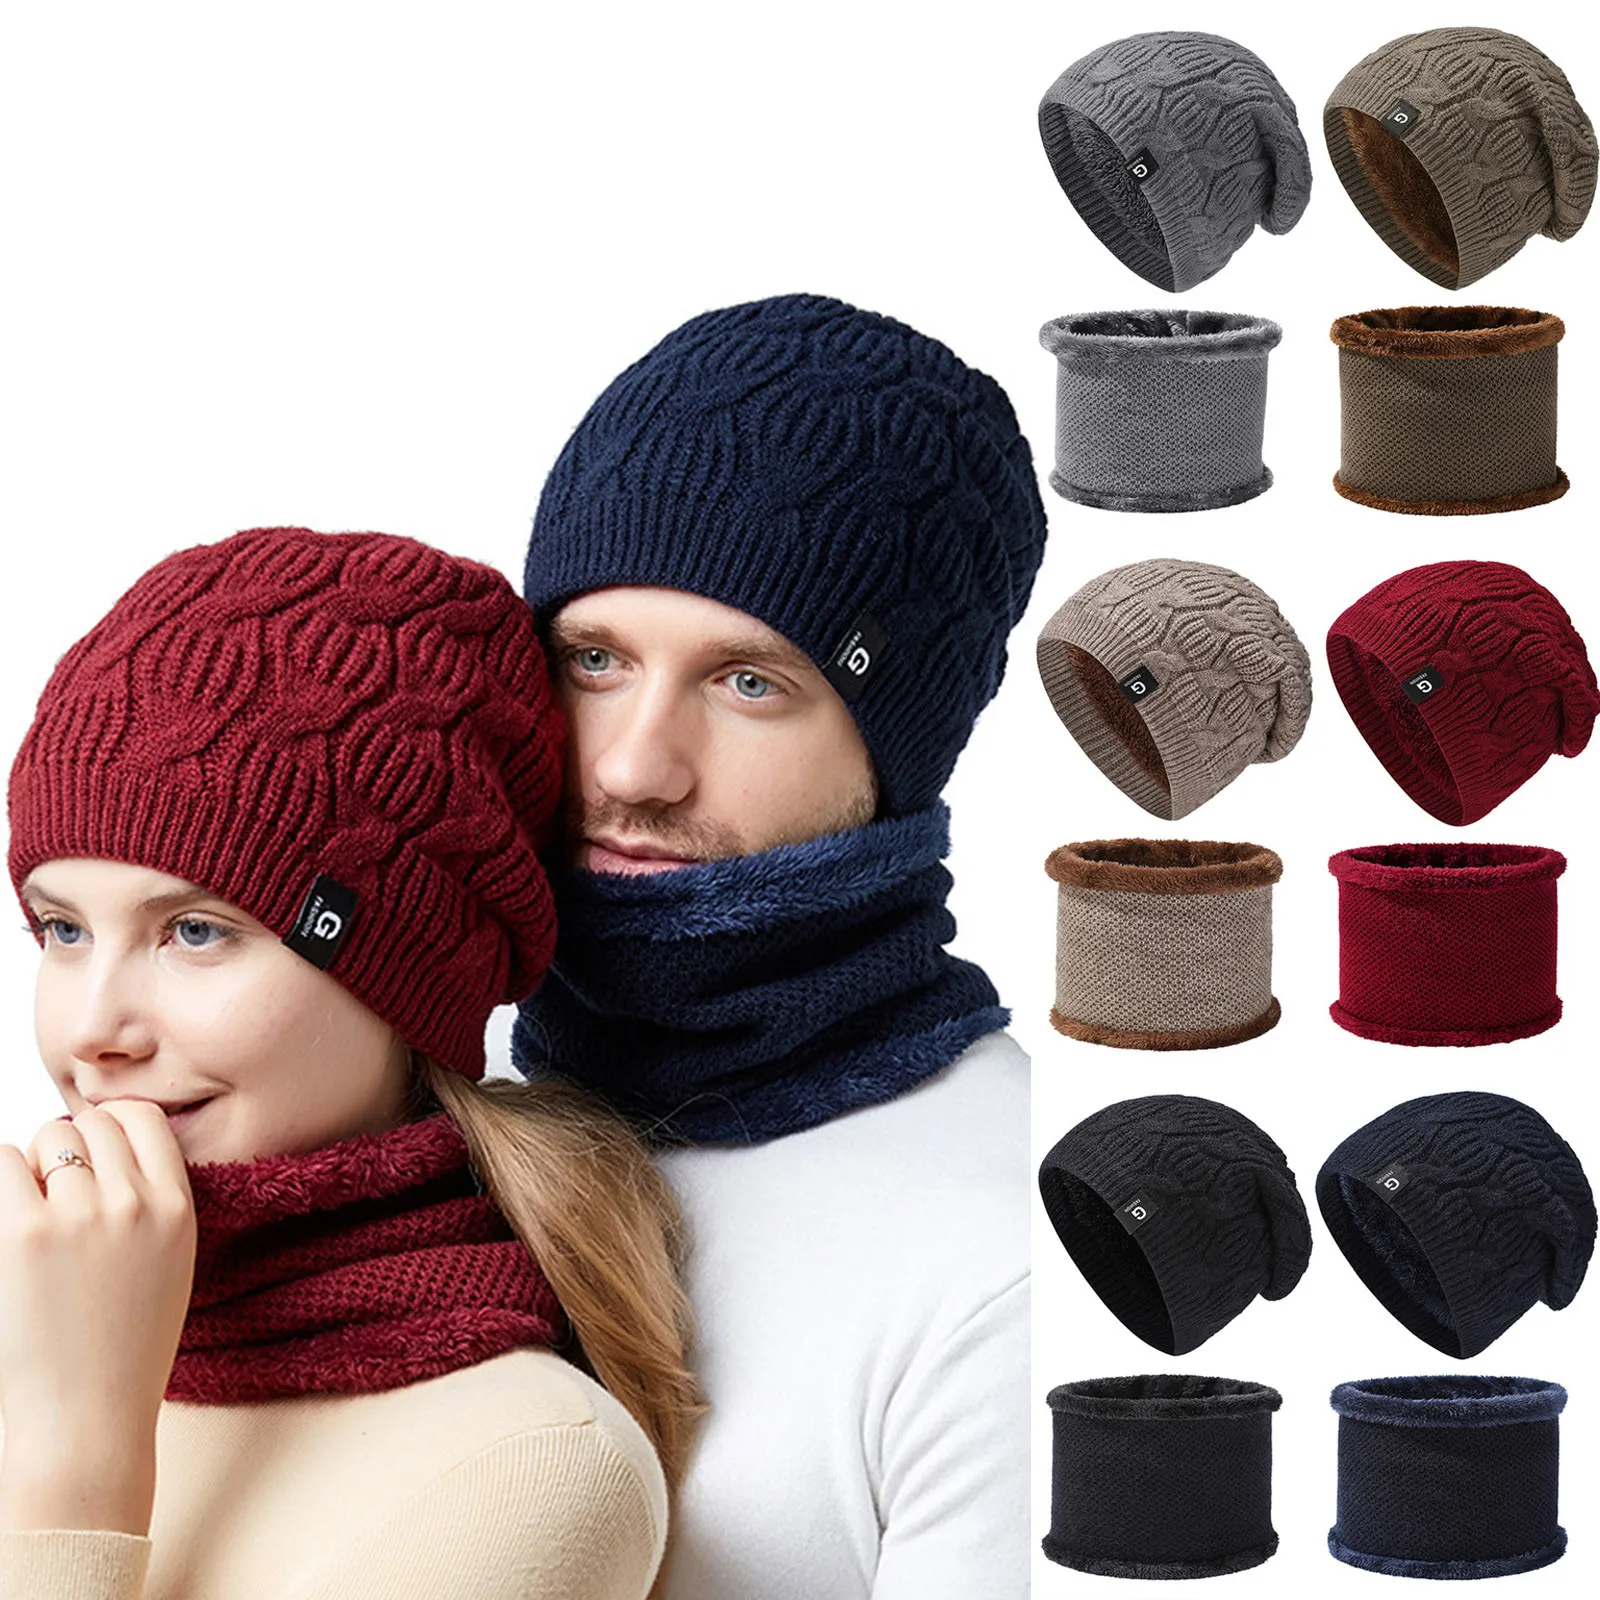 

Winter Knitted Hats Women Thick Warm Ski Hat Sets Female Windproof Beanie Caps Outdoor Riding Set Siamese Scarf Collar Girl Gift